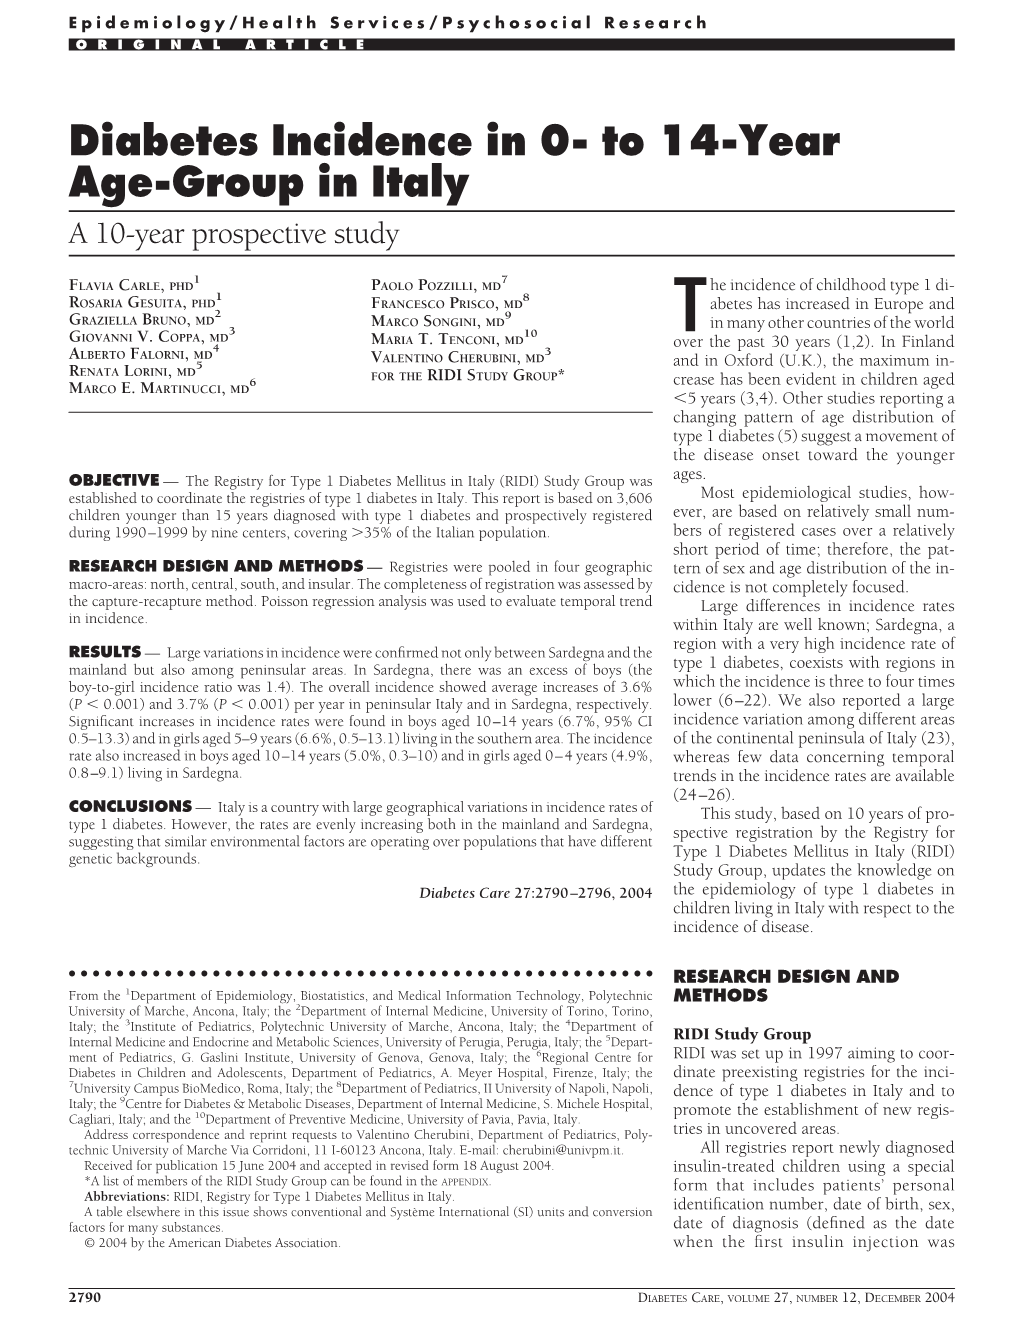 Diabetes Incidence in 0- to 14-Year Age-Group in Italy a 10-Year Prospective Study